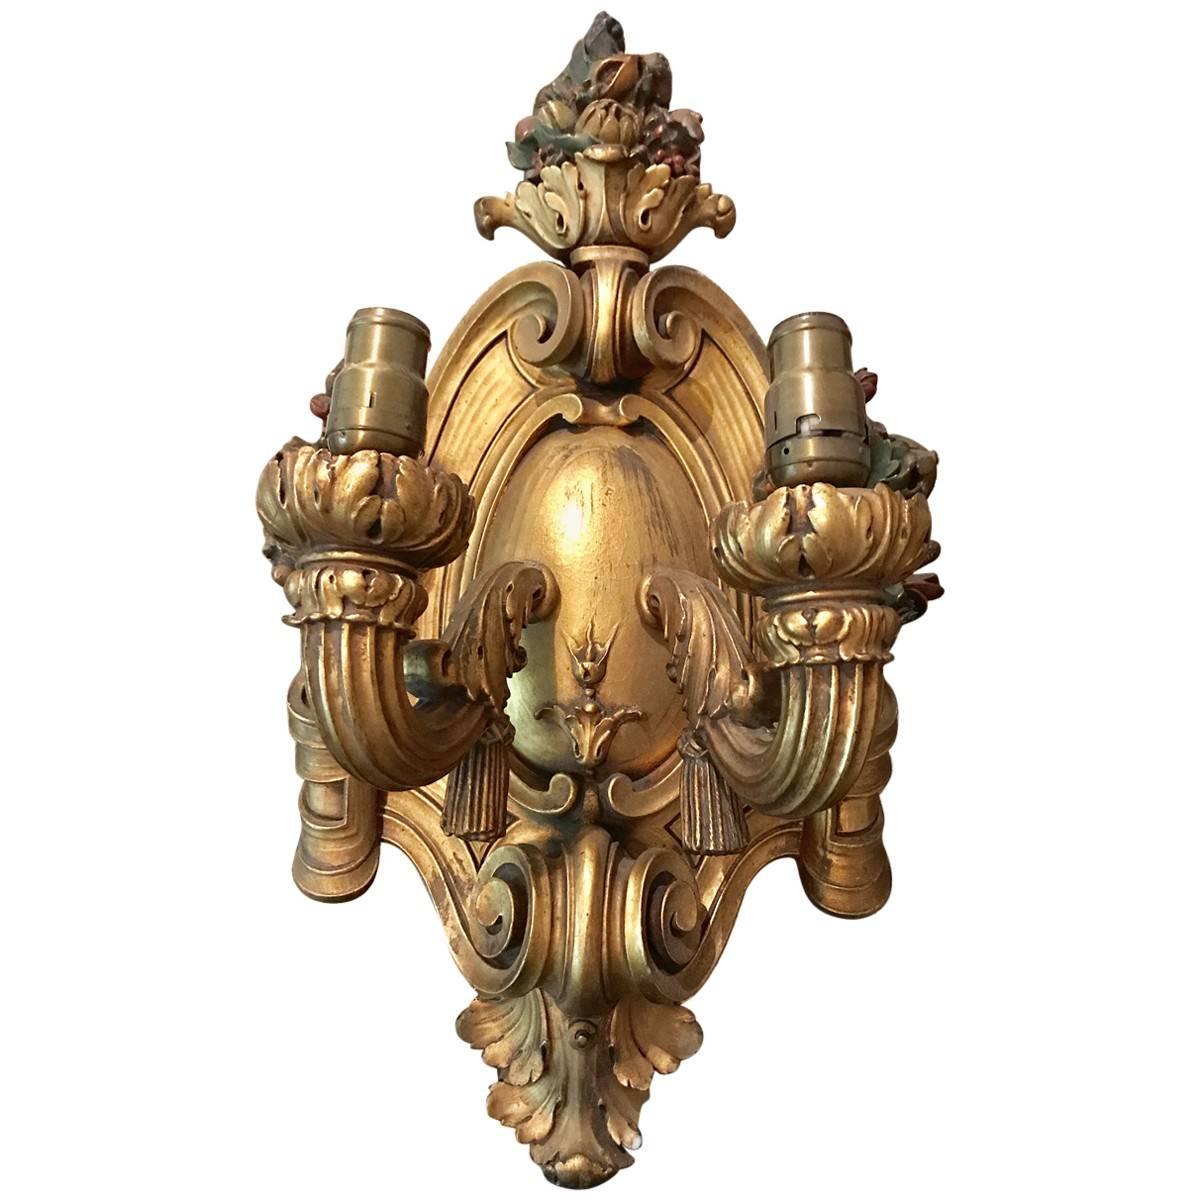 A collectible piece from bygone days, featuring the finest craftsmanship, materials, and design elements of its given era. Classic light fixtures with an elegant twist, this eye-catching pair of wall sconces is handcrafted from gilt. Two arms and